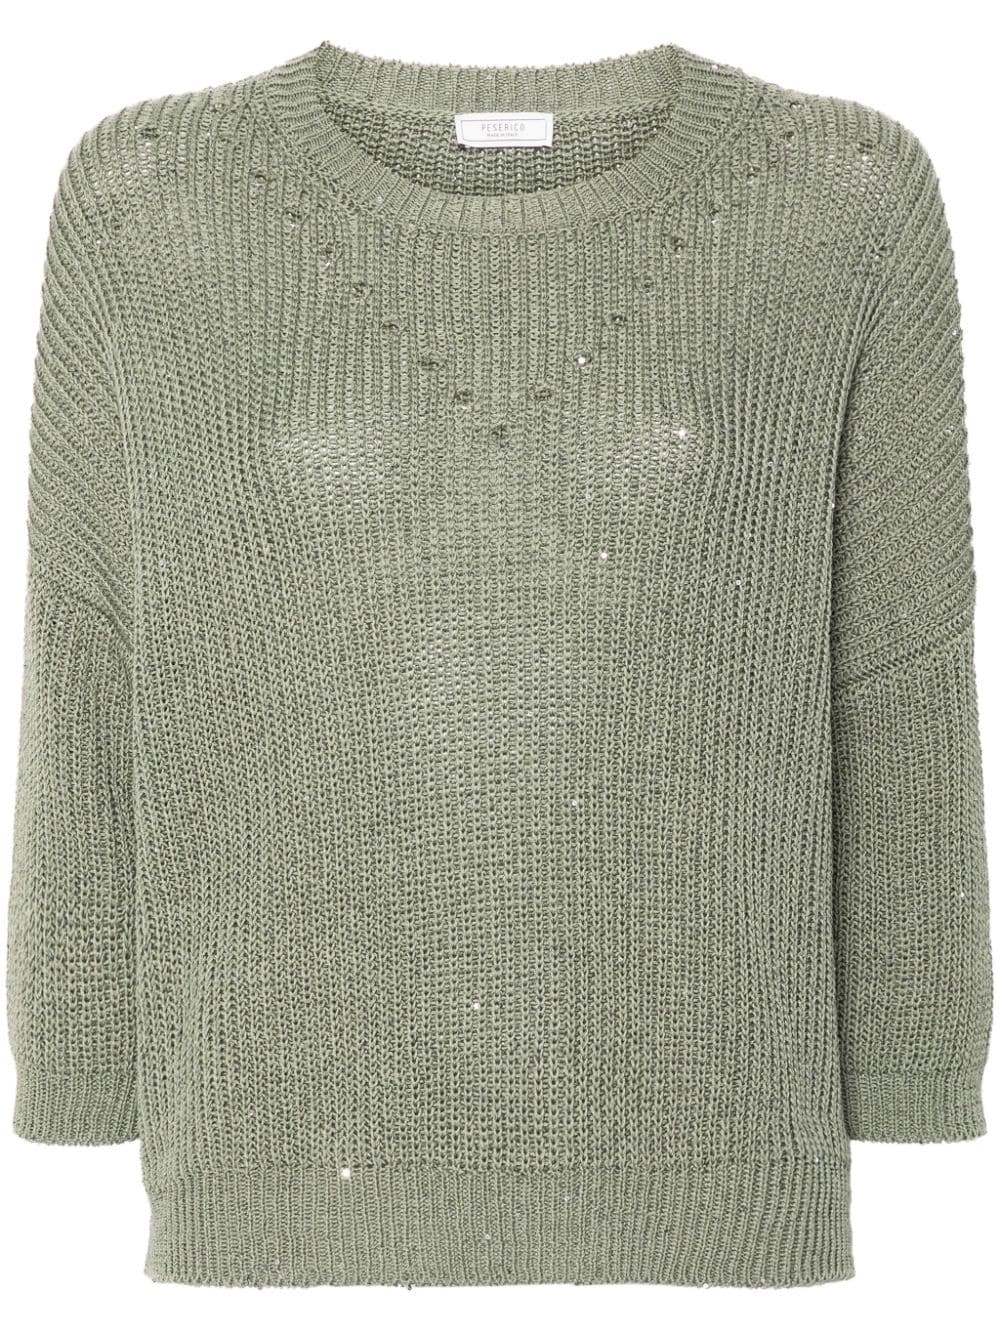 Peserico sequin-embellished knitted jumper - Green von Peserico